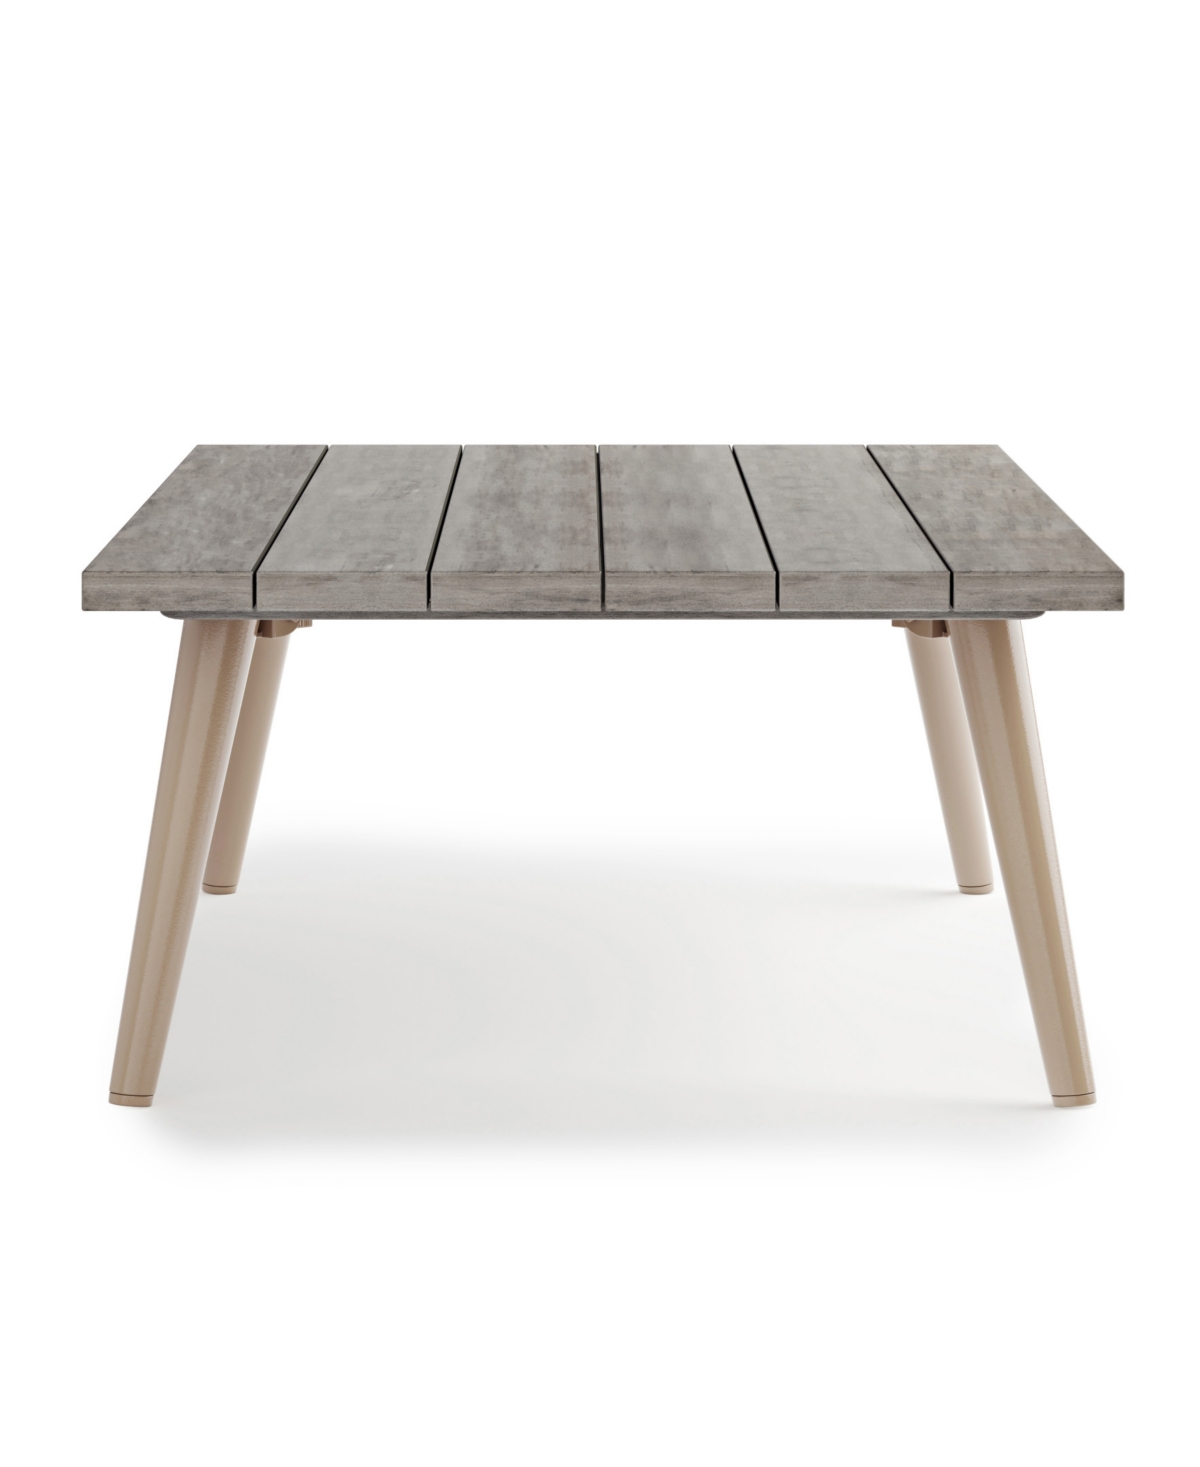 Shop Simpli Home Belize Solid Acacia Wood Outdoor Coffee Table In Distressed Weathered Grey